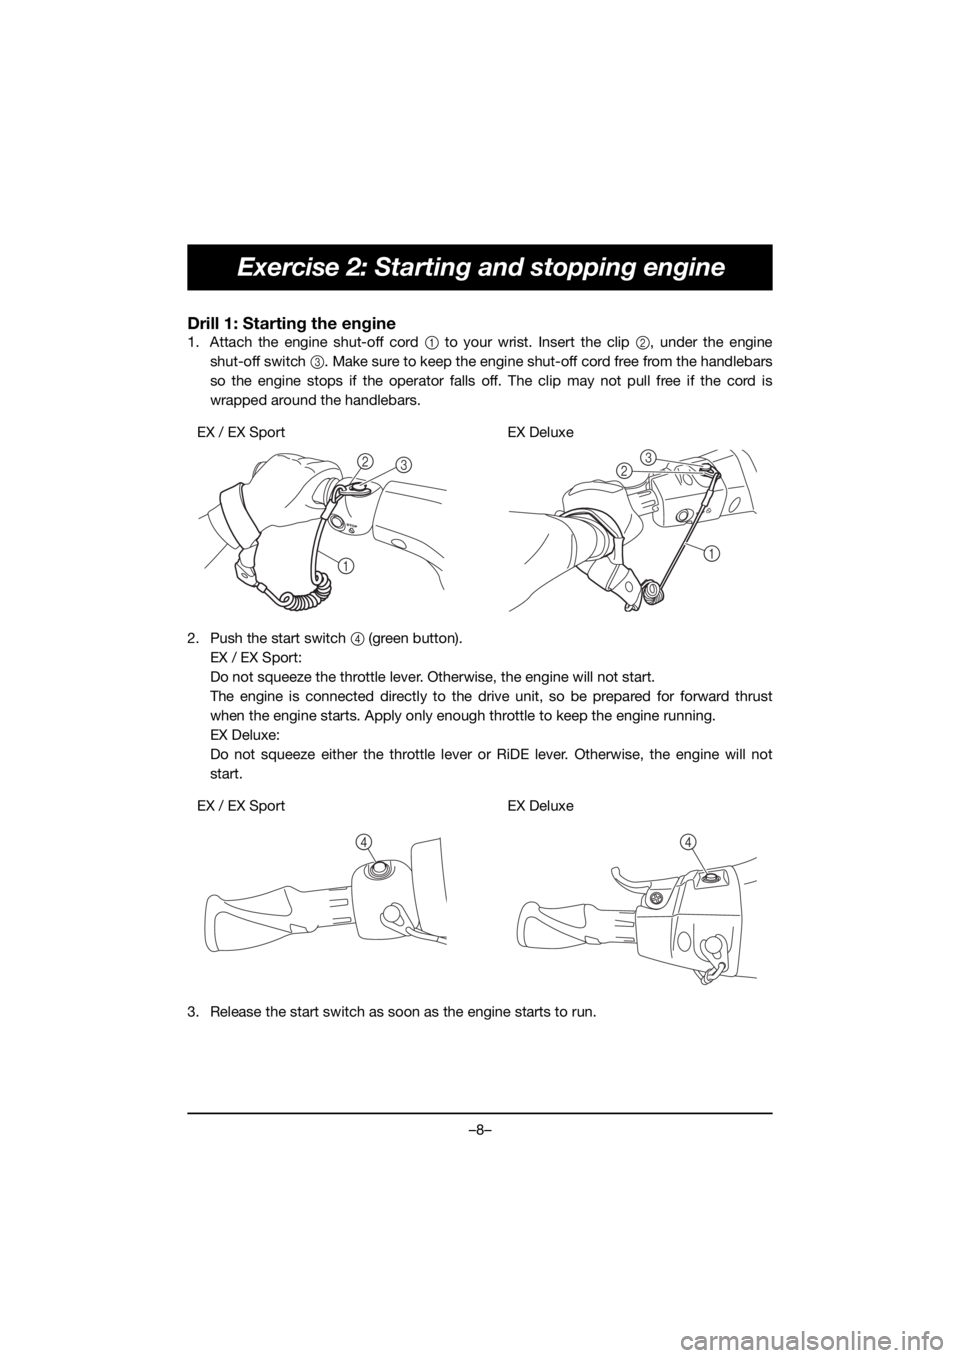 YAMAHA EX 2020 User Guide –8–
Exercise 2: Starting and stopping engine
Drill 1: Starting the engine
1. Attach the engine shut-off cord 1 to your wrist. Insert the clip 2, under the engine
shut-off switch 3. Make sure to ke